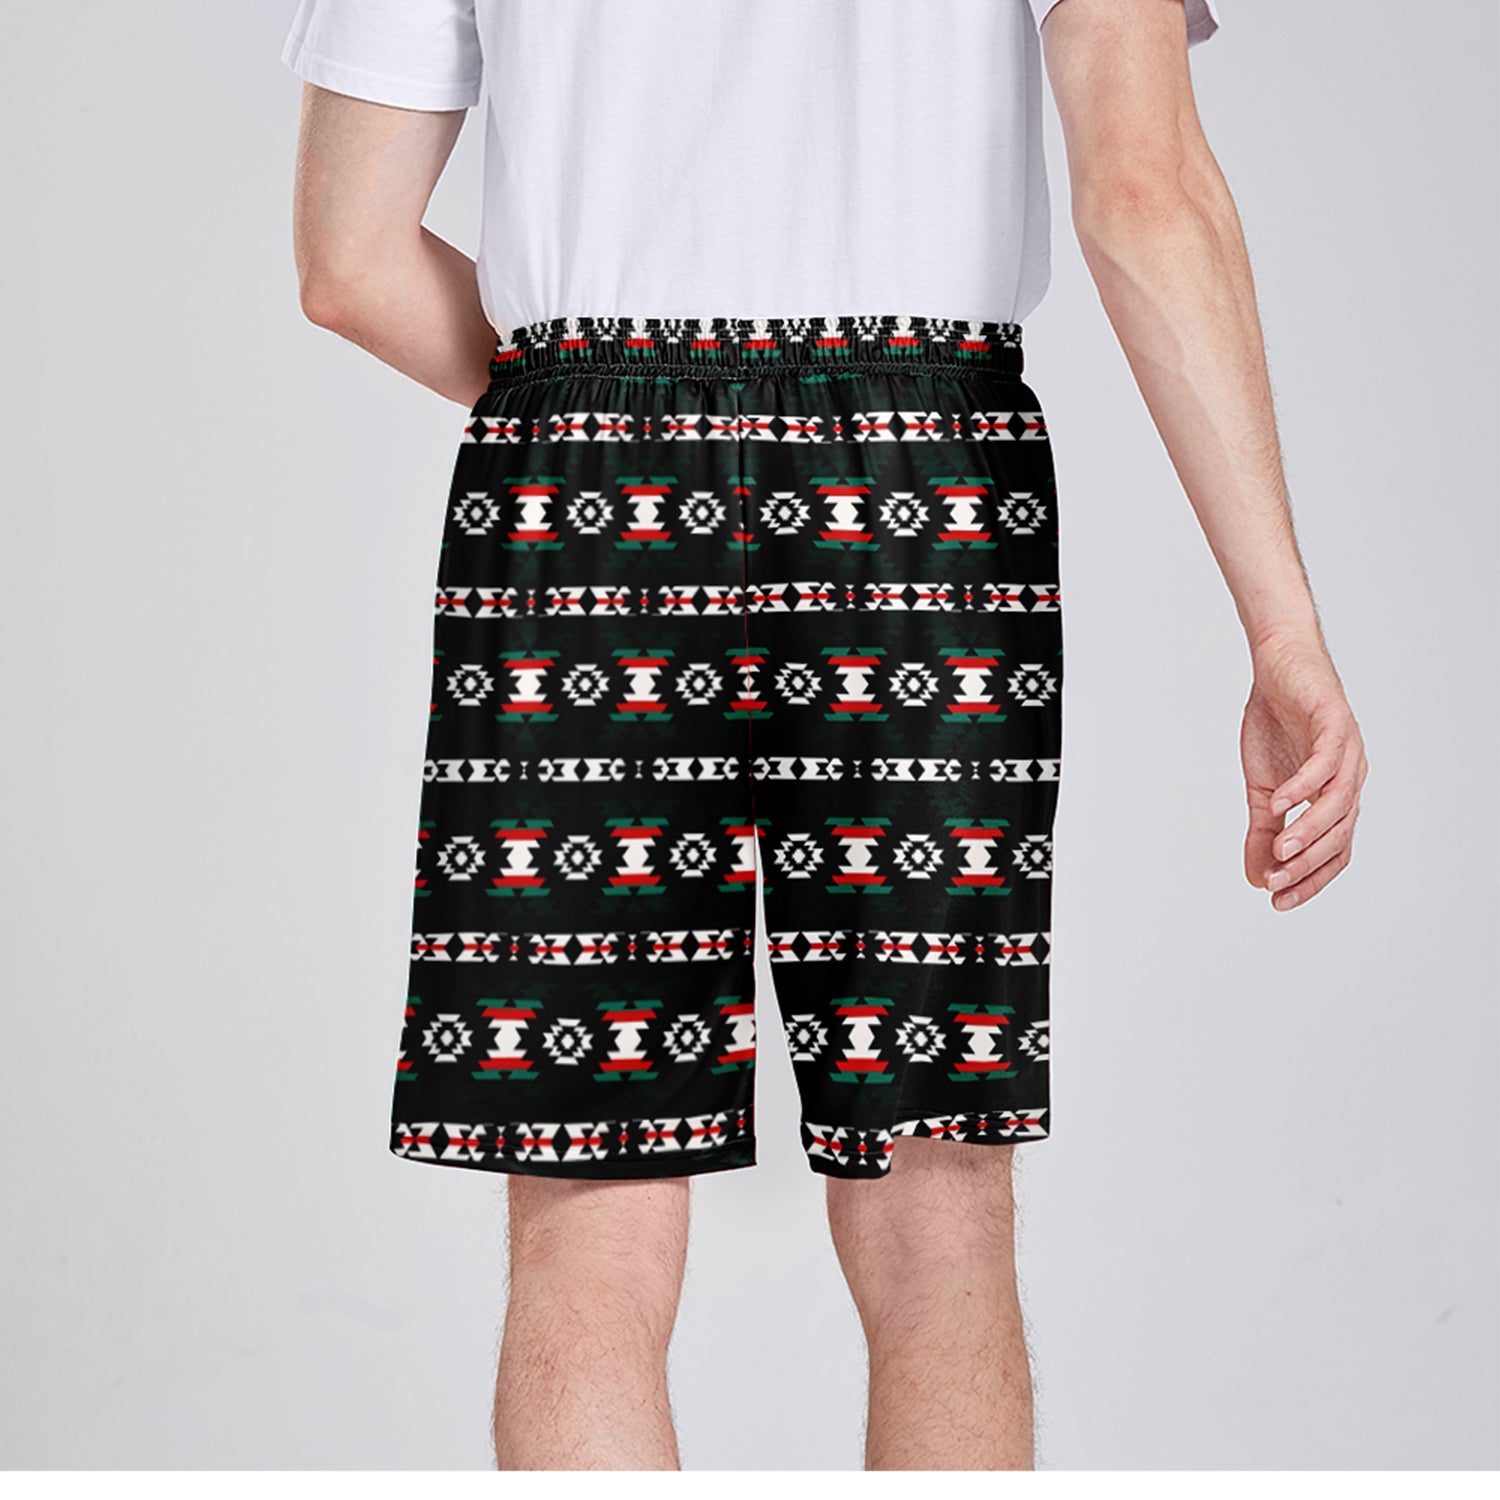 Cree Confederacy War Party Athletic Shorts with Pockets